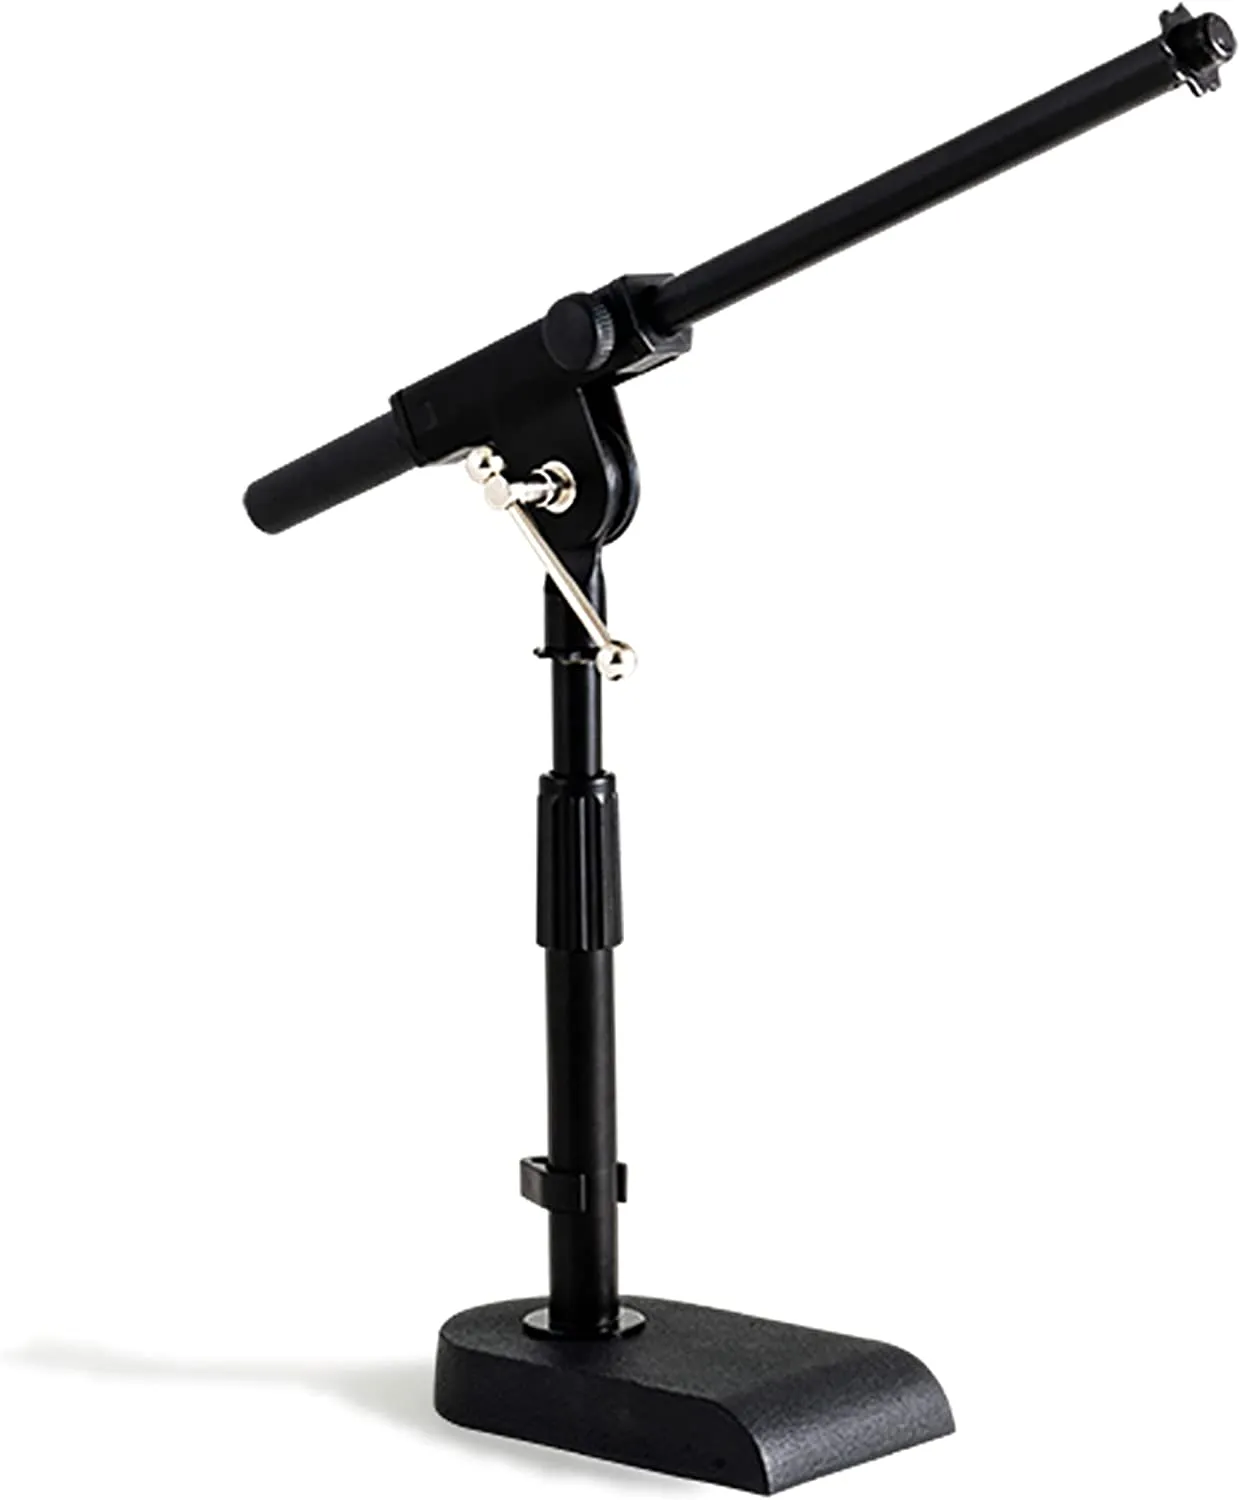 Stage Rocker Adjustable Low-profile Microphone Stand